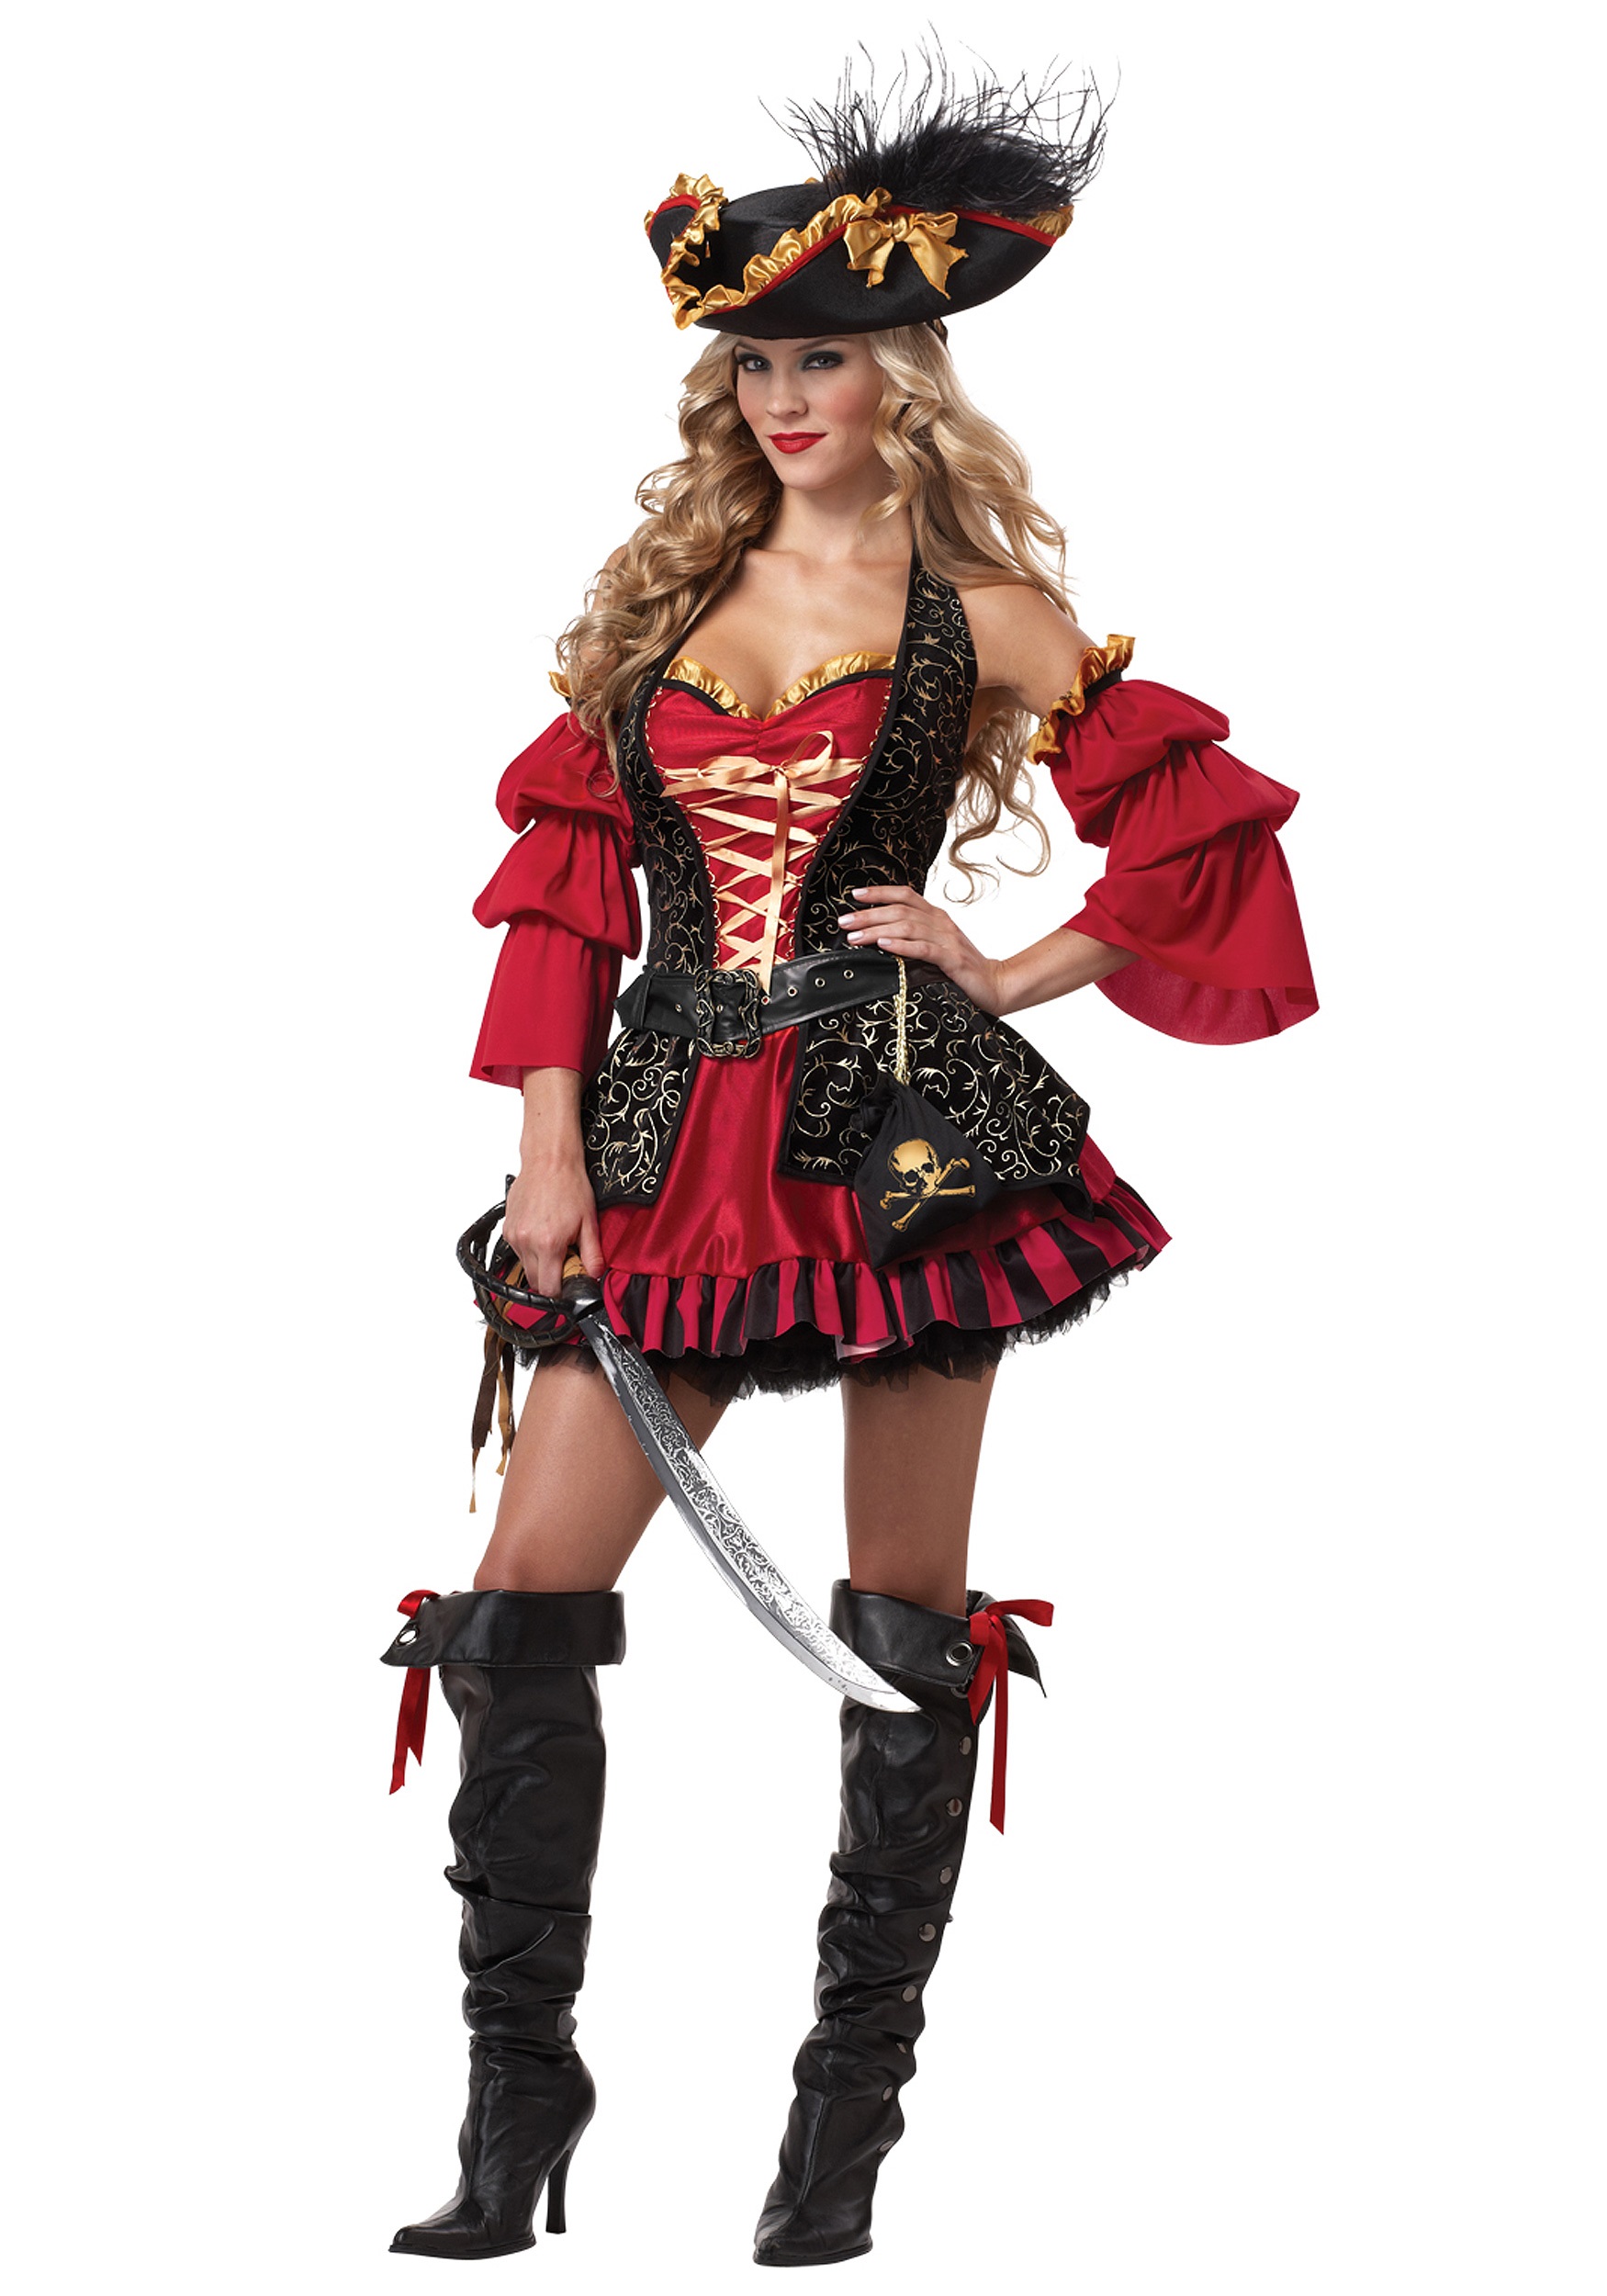 Photos - Fancy Dress California Costume Collection Sexy Spanish Pirate Costume for Women | Pira 